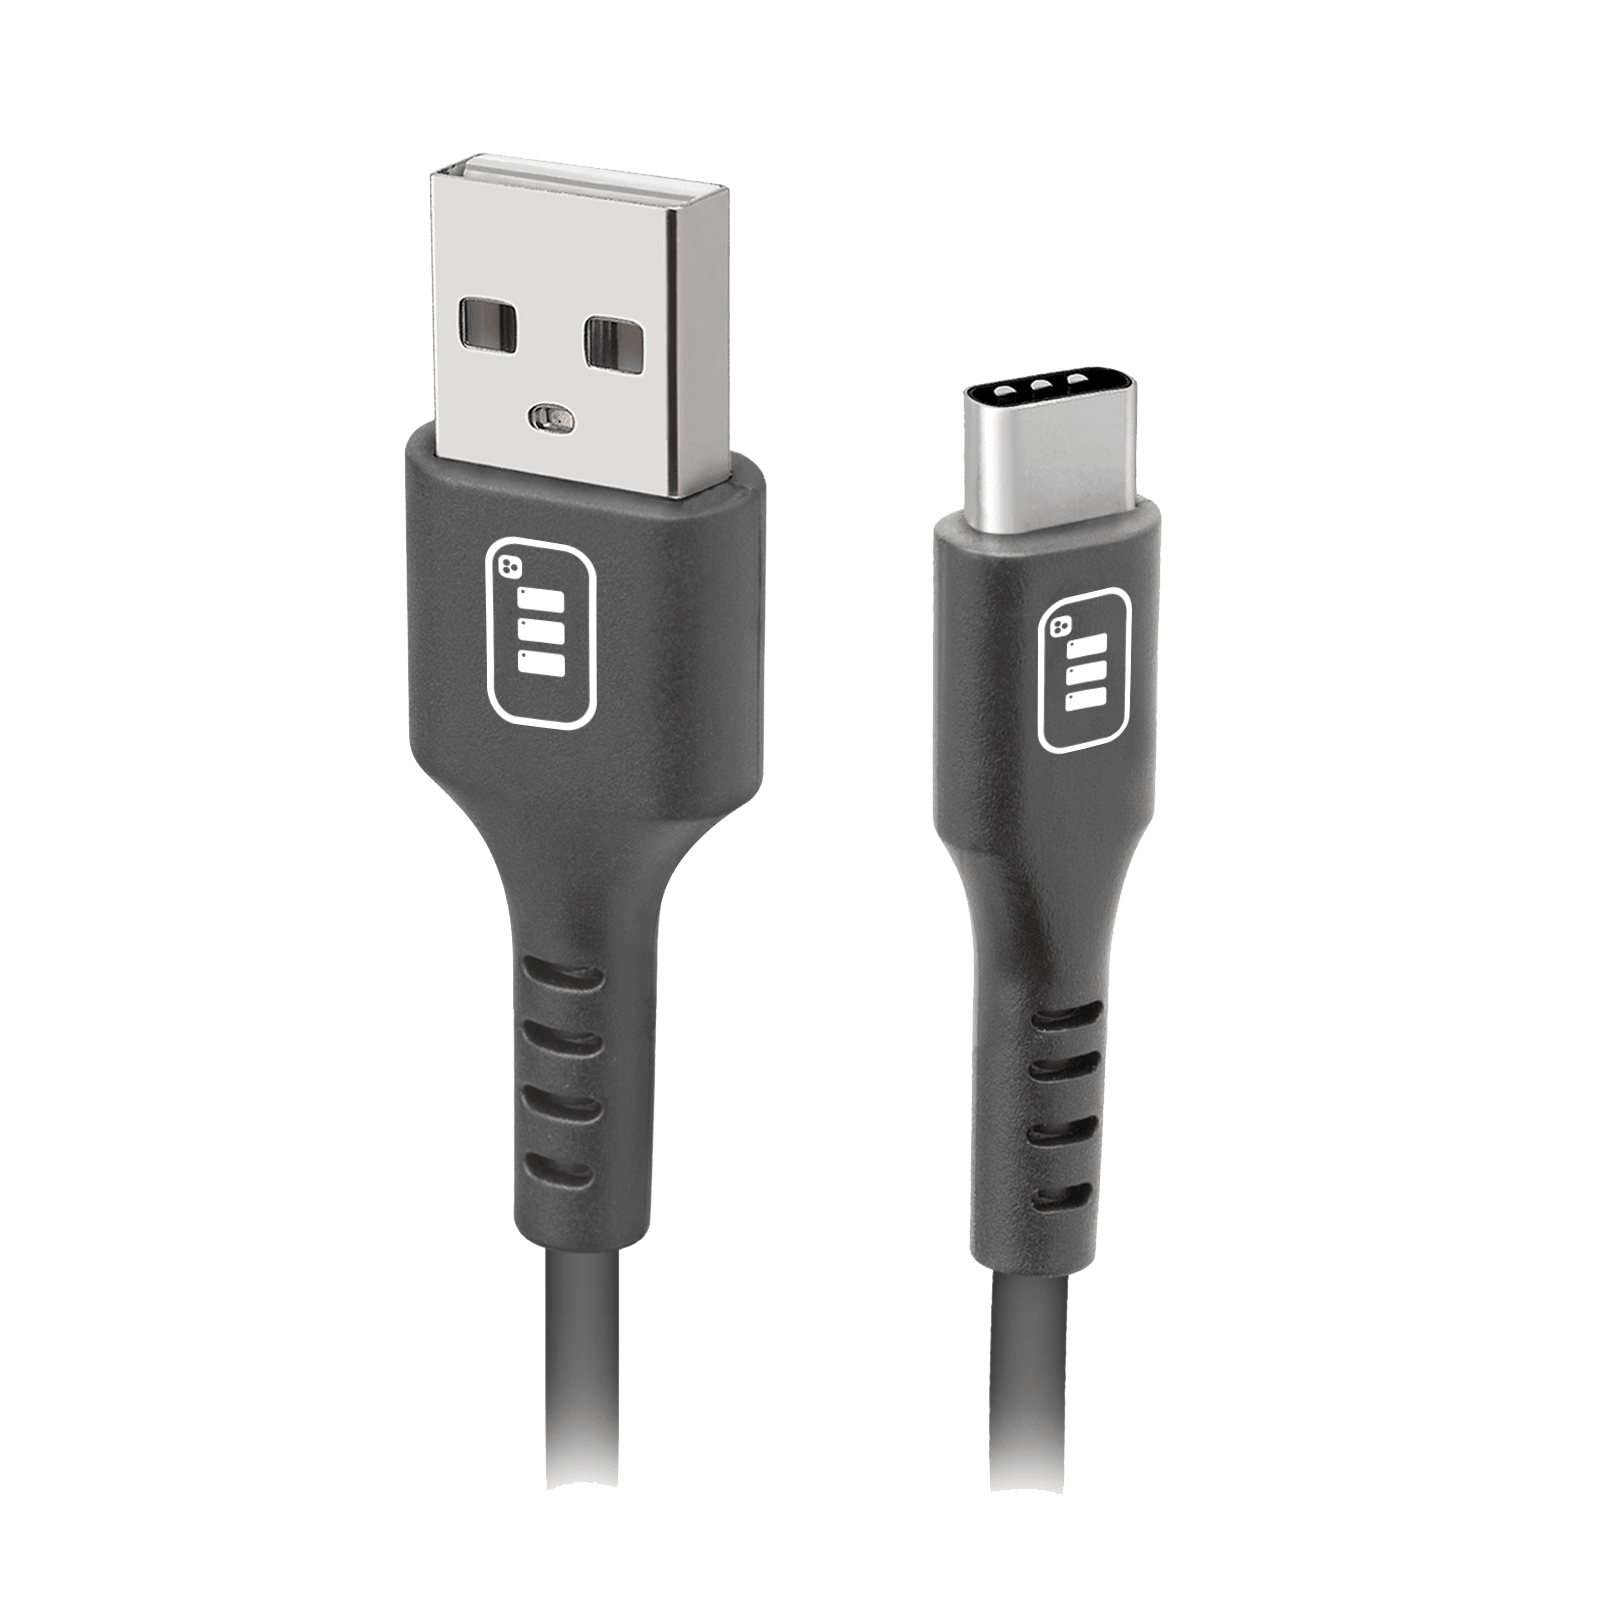 CAVO - USB TO TYPE C - Just in Case